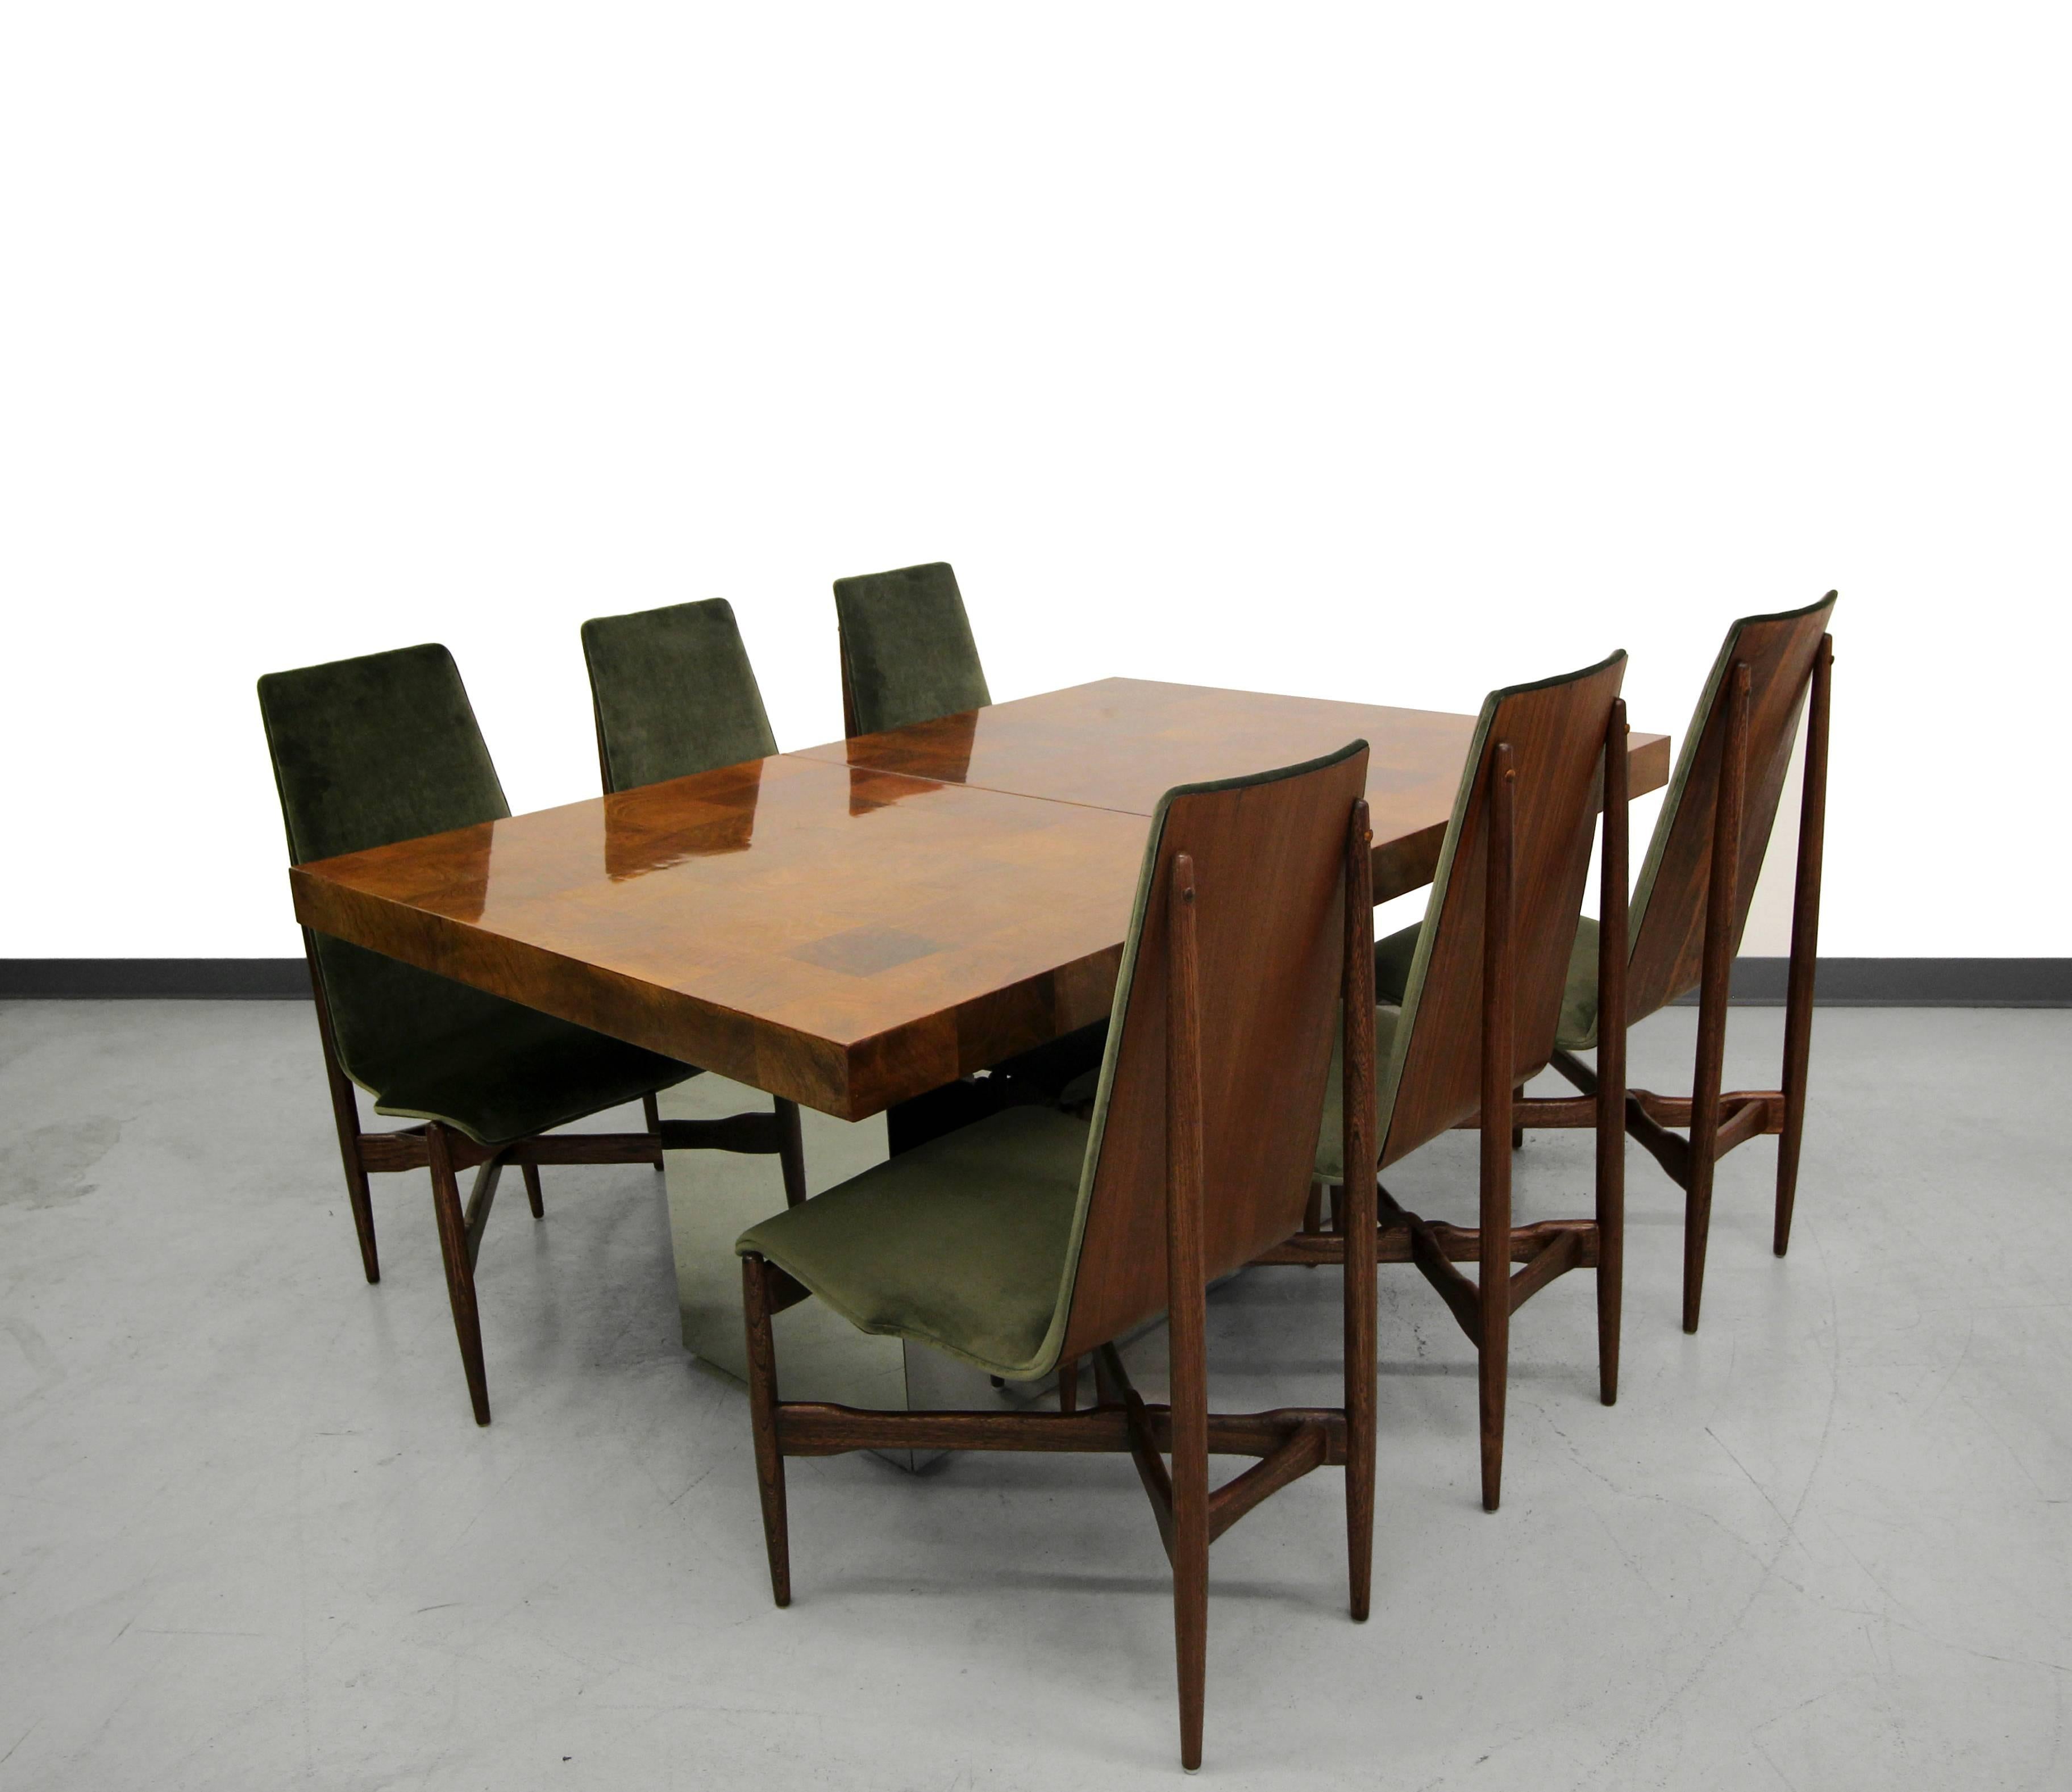 Beautiful set of six Mid-Century bentwood dining chairs by Kodawood, designed by Seymore J. Weiner. These chairs are the epitome of Mid-Century dining chair goodness. The chairs have been professionally reupholstered and are ready for their new home.